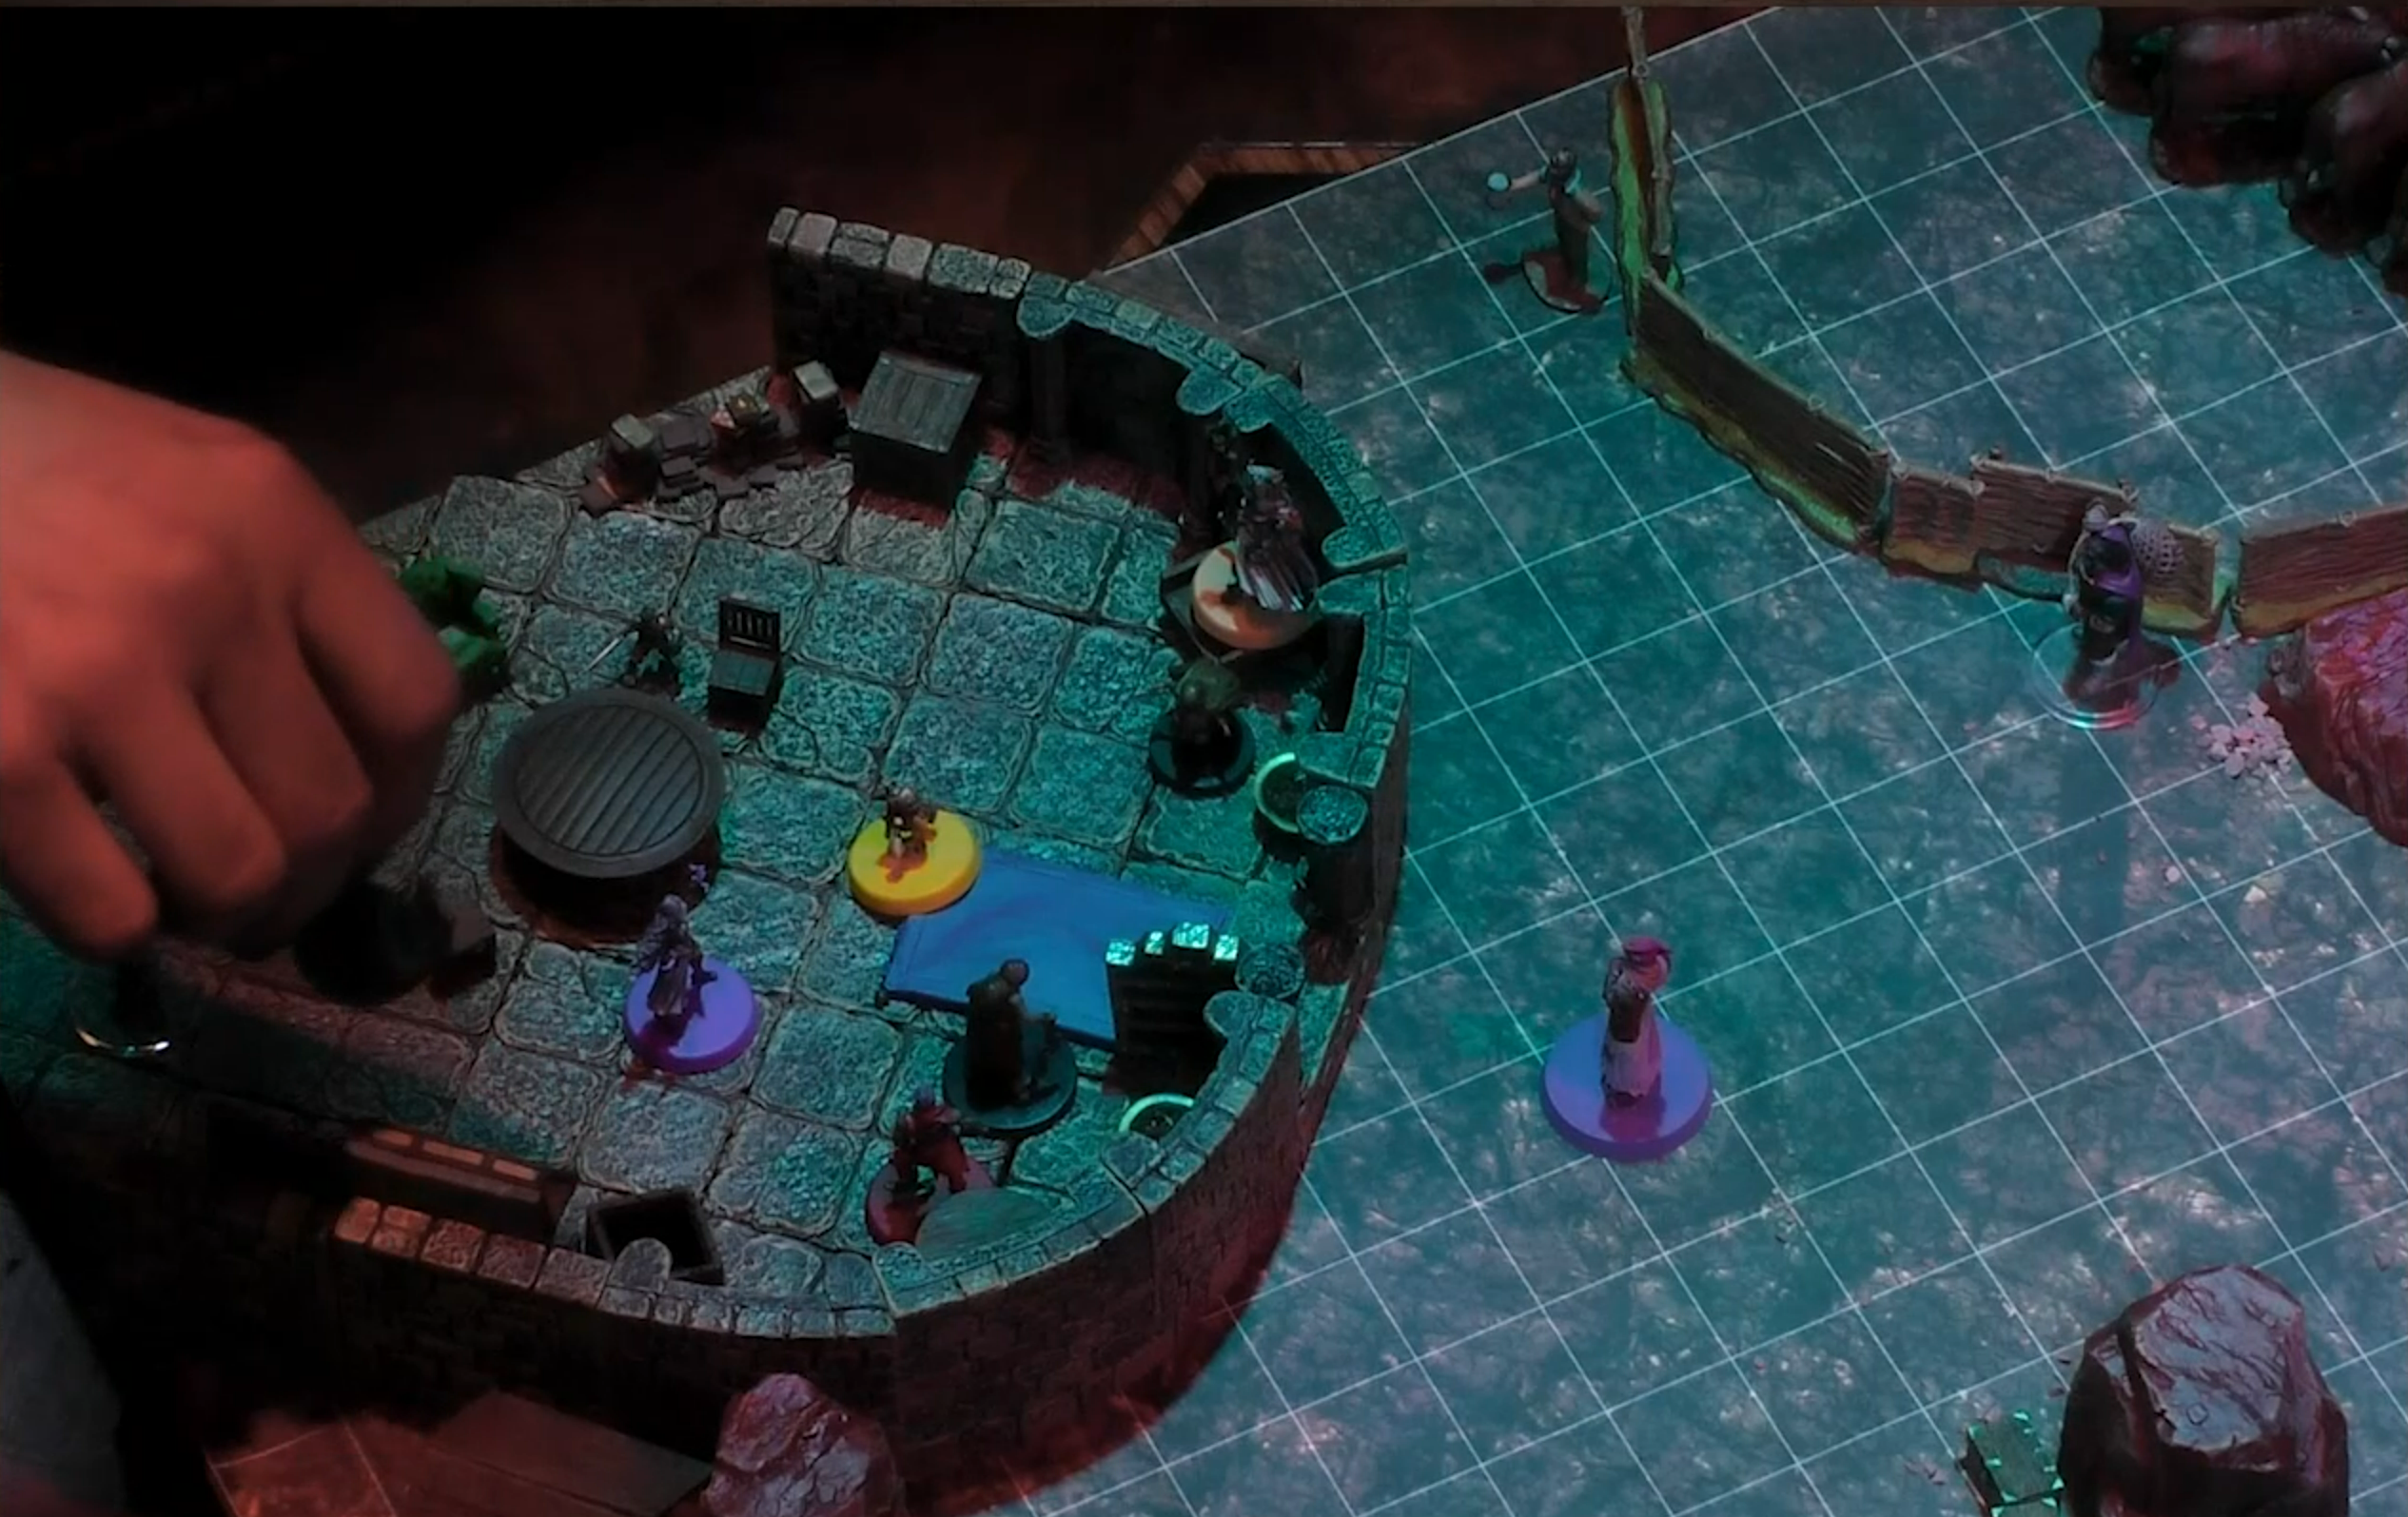 A battlemap of a rounded stone building with an expanse of flat ground outside. FCG, Orym, Imogen, Fearne, and other tokens are inside the building. A purple token stands outside at the entance. Two other tokens stand by a fenced area.